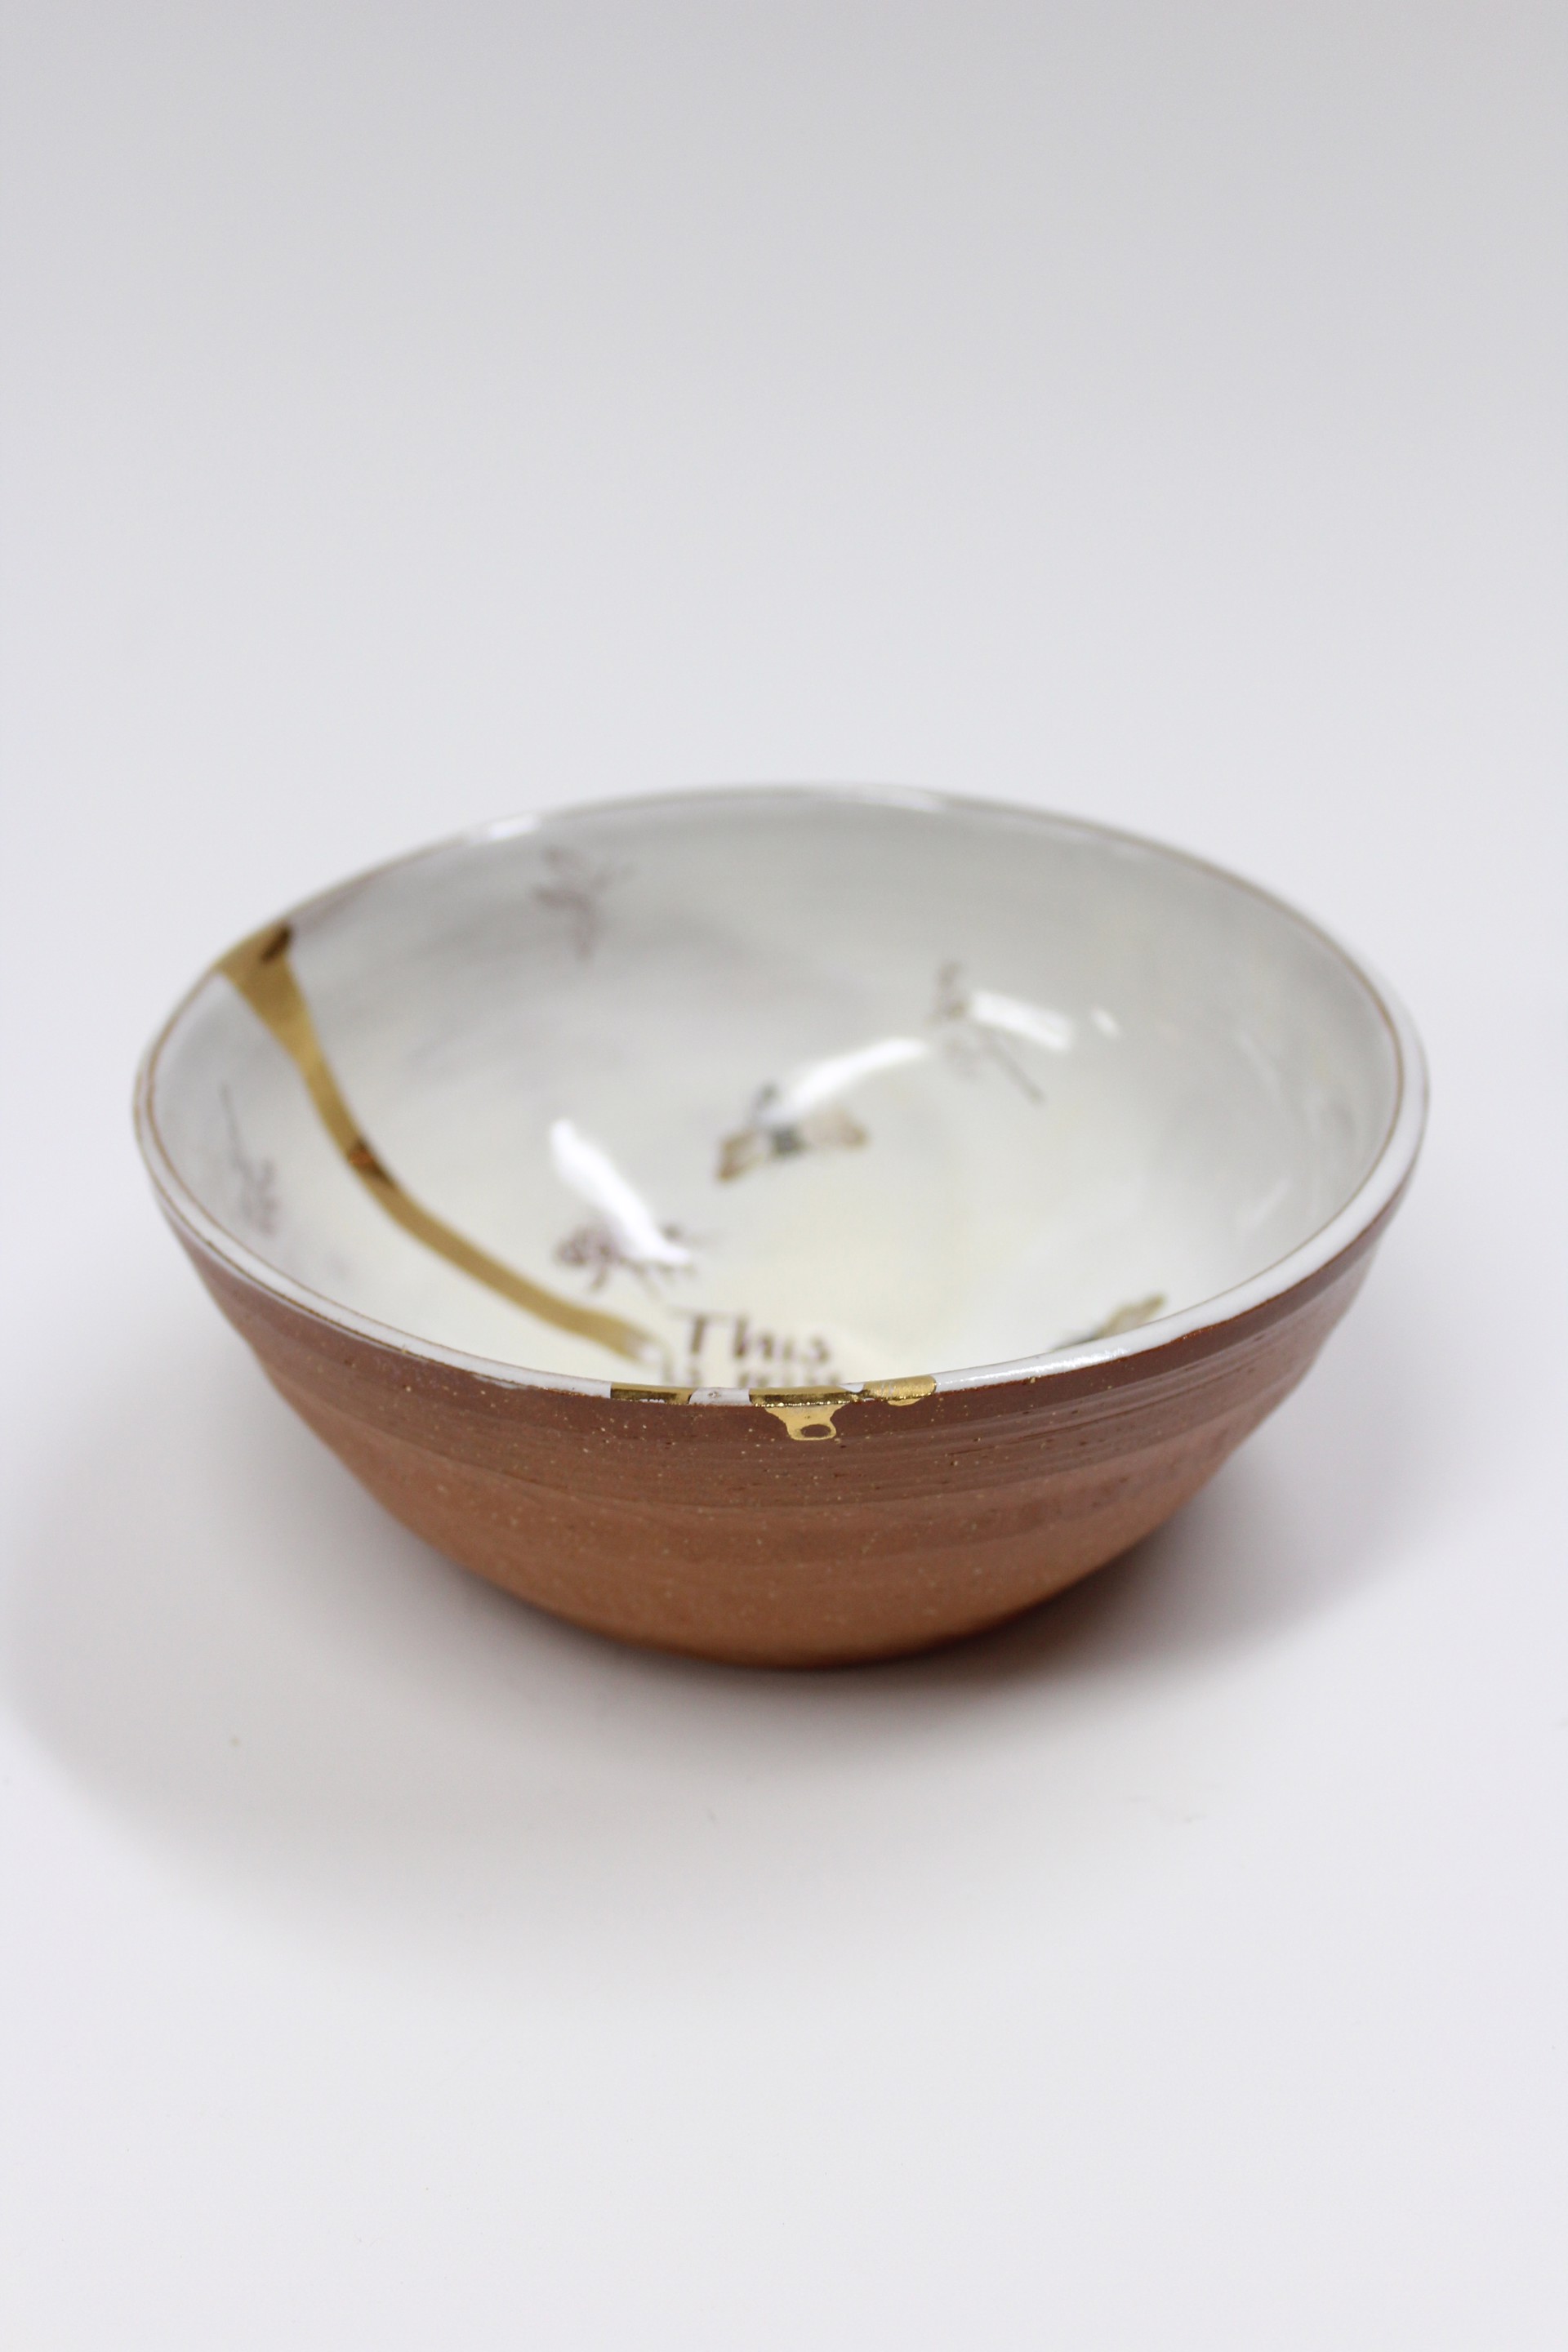 Begging Bowl 4 (happy place) by Therese Knowles